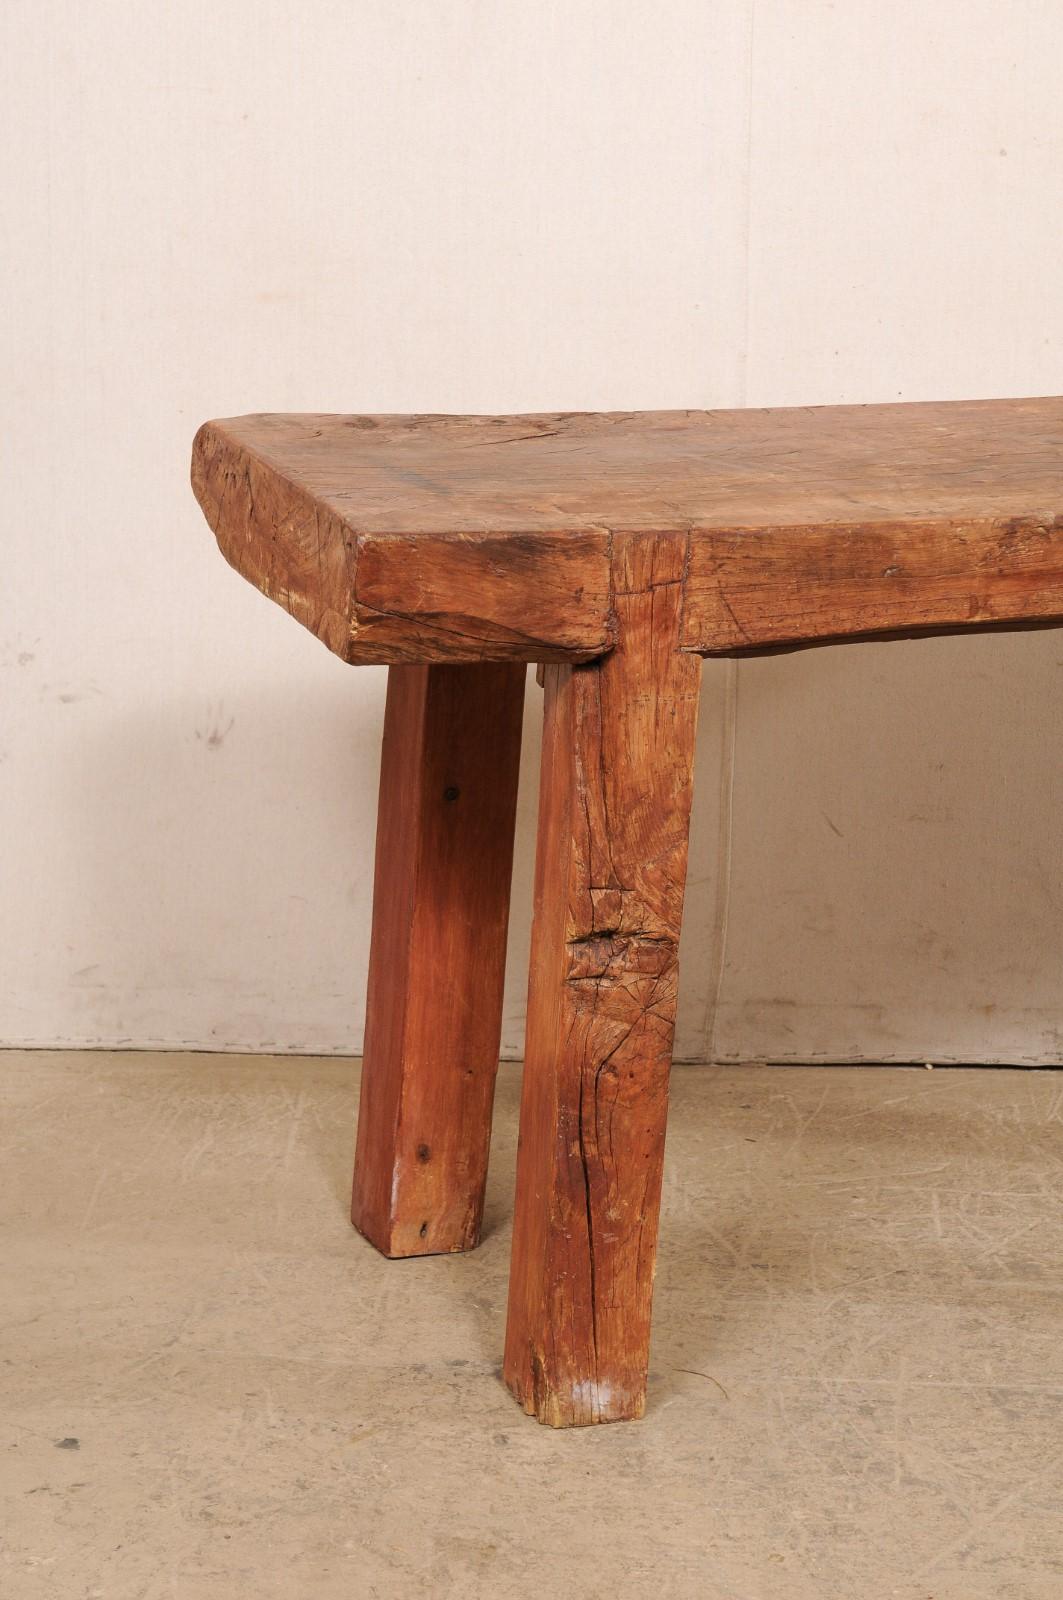 Asian Beautifully Rustic Thick Chopping Block Top Table Would Be a Great Sink Base